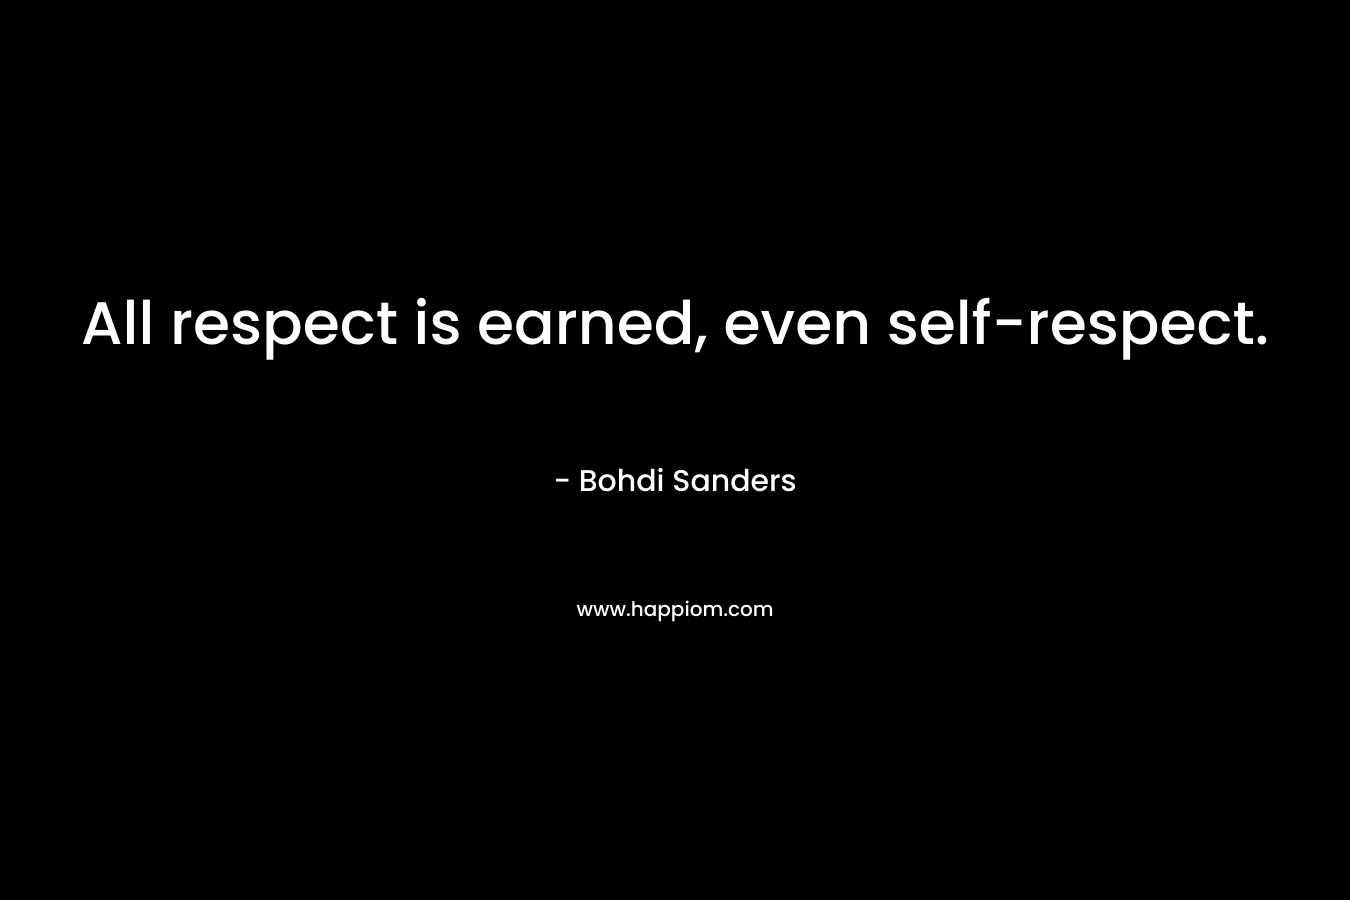 All respect is earned, even self-respect.